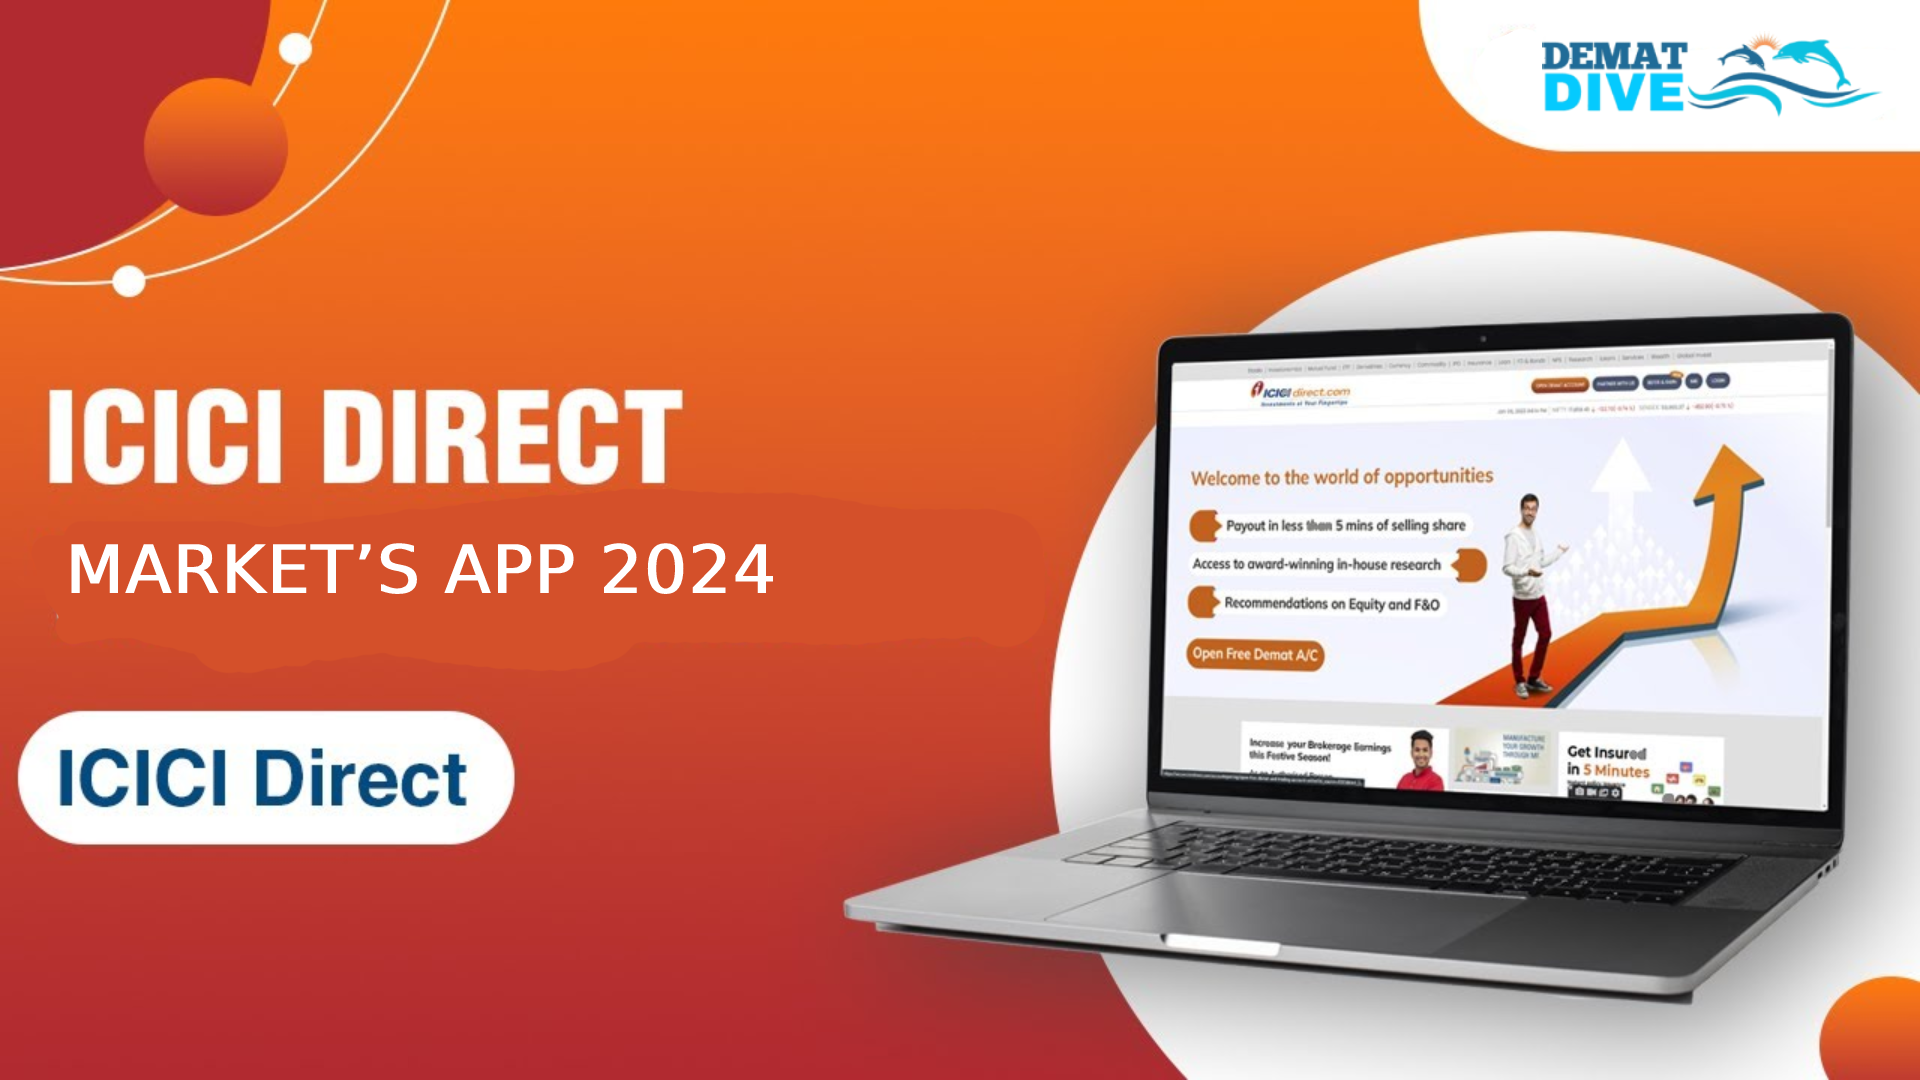 ICICI Direct Market’s App 2024 Top Features to Know About DematDive